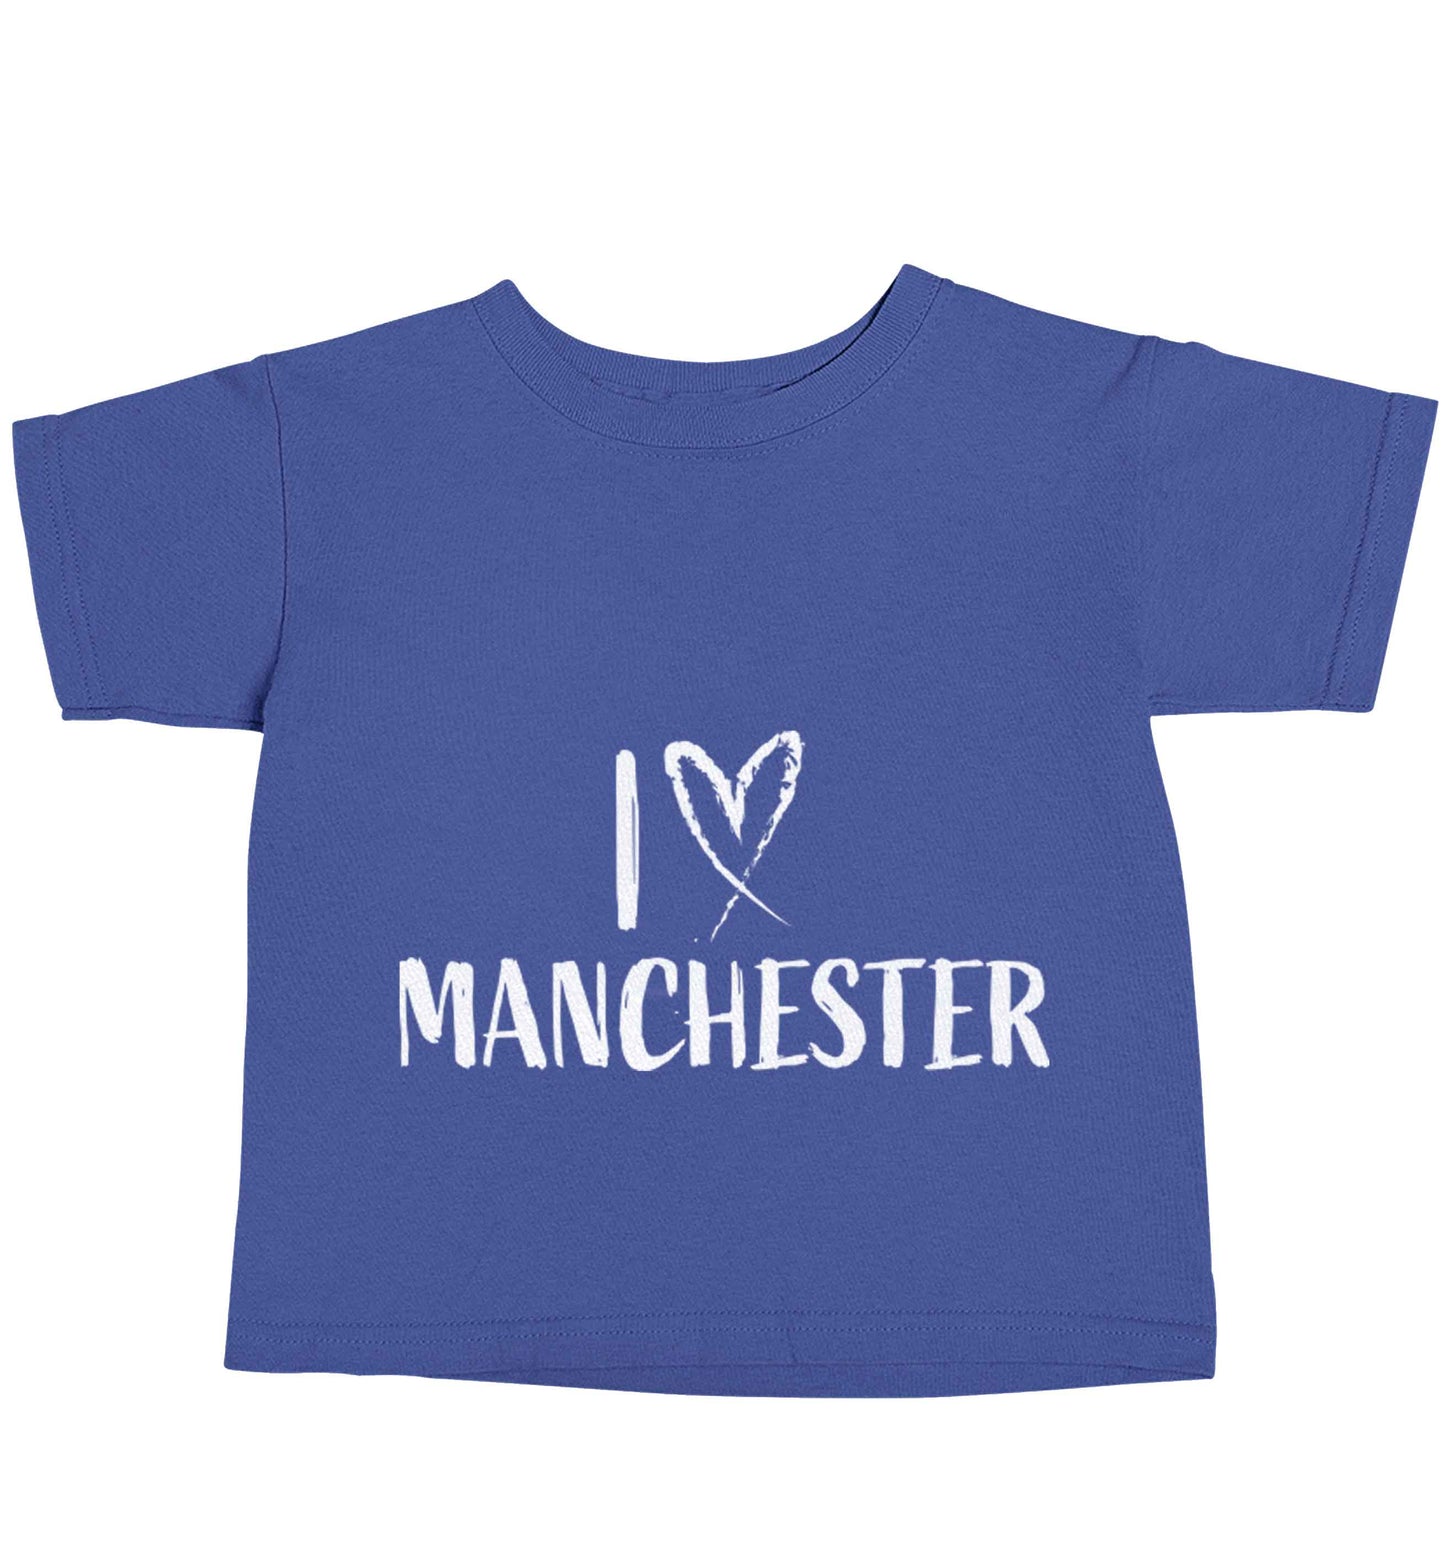 I love Manchester blue baby toddler Tshirt 2 Years